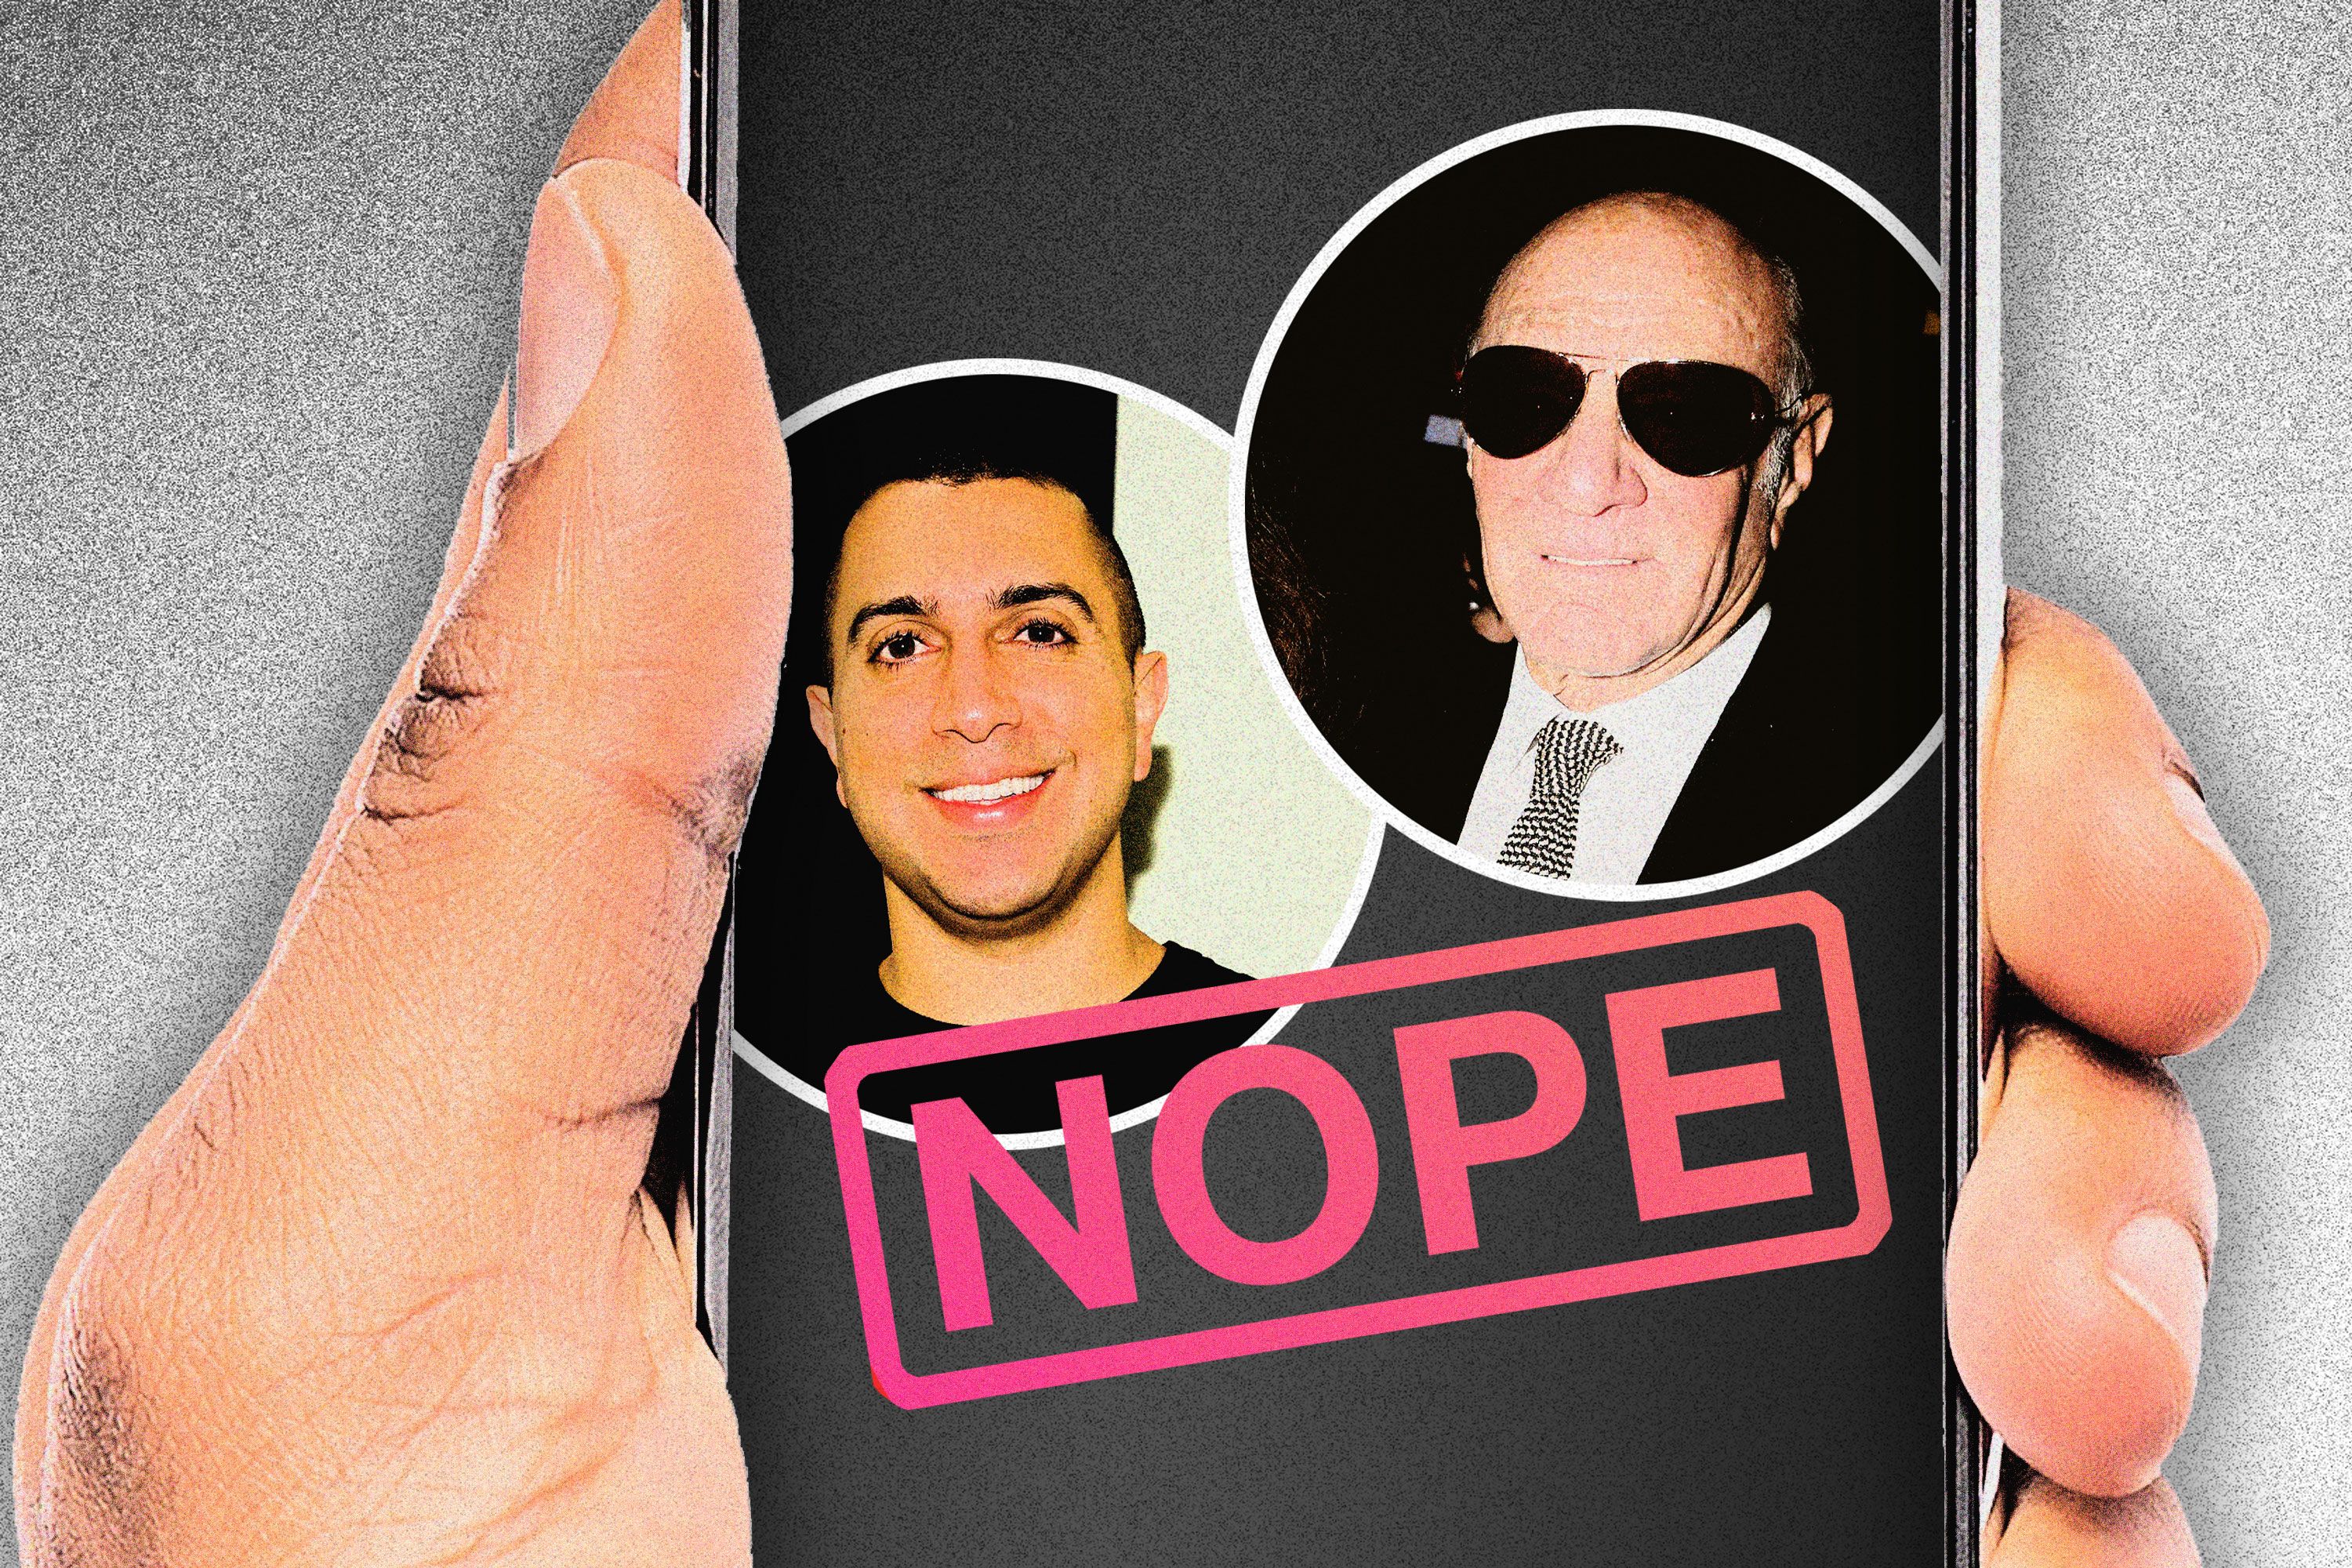 The Tinder Revenge Story Between Sean Rad and Barry Diller photo